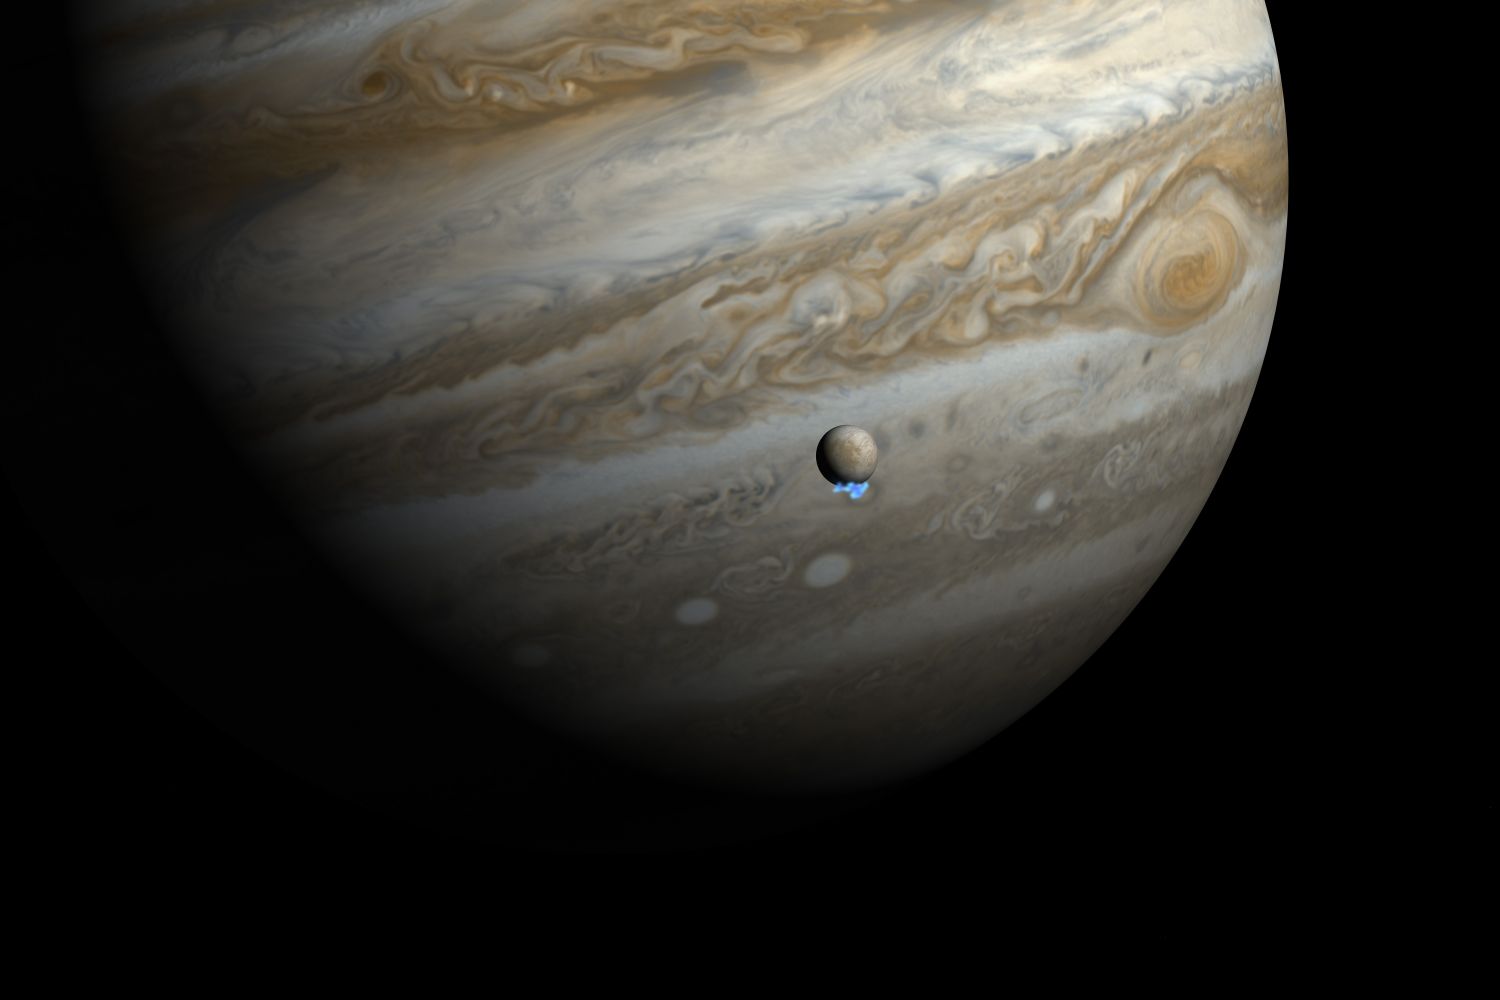 An artist's impression of Jupiter and its moon Europa, based on actual visible light images. Last year, a team of astronomers using the Hubble Space Telescope, had reported the detection of signs of water vapour being vented off Europa's south pole. A new study comes to challenge this interpretation, by presenting evidence that Europa's geophysical activity might not be as geophysically active as previously thought. Image Credit: NASA, ESA, and M. Kornmesser